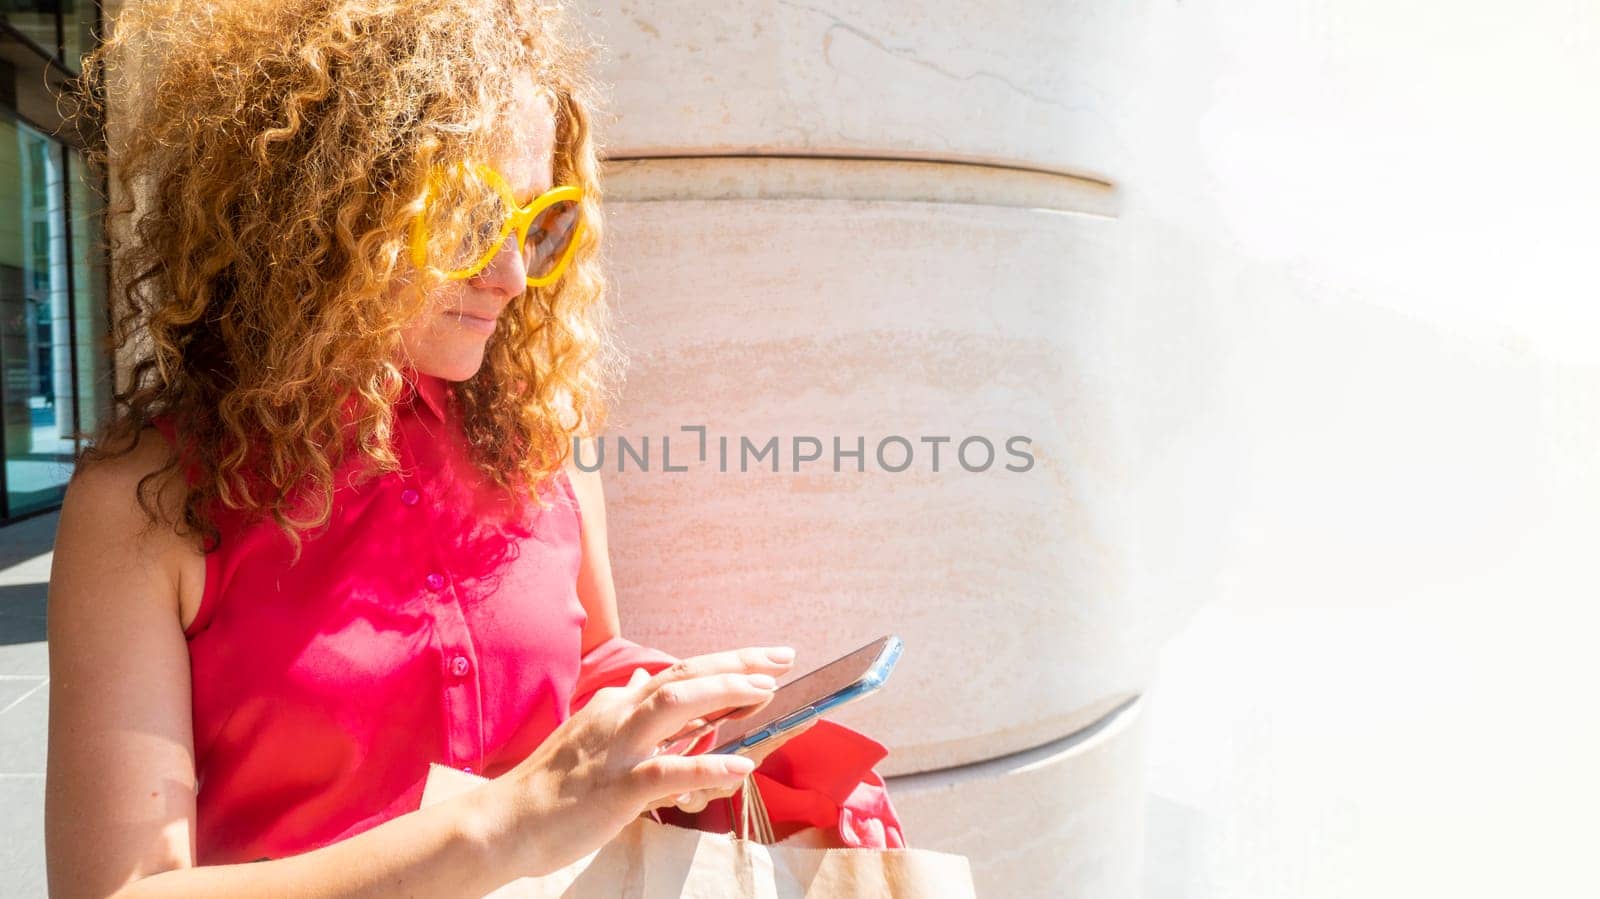 Coquettish s young female model in fashionable elegant bright multicolored green and red clothes looks at her phone against the background of the columns of an office building in the city. by kajasja